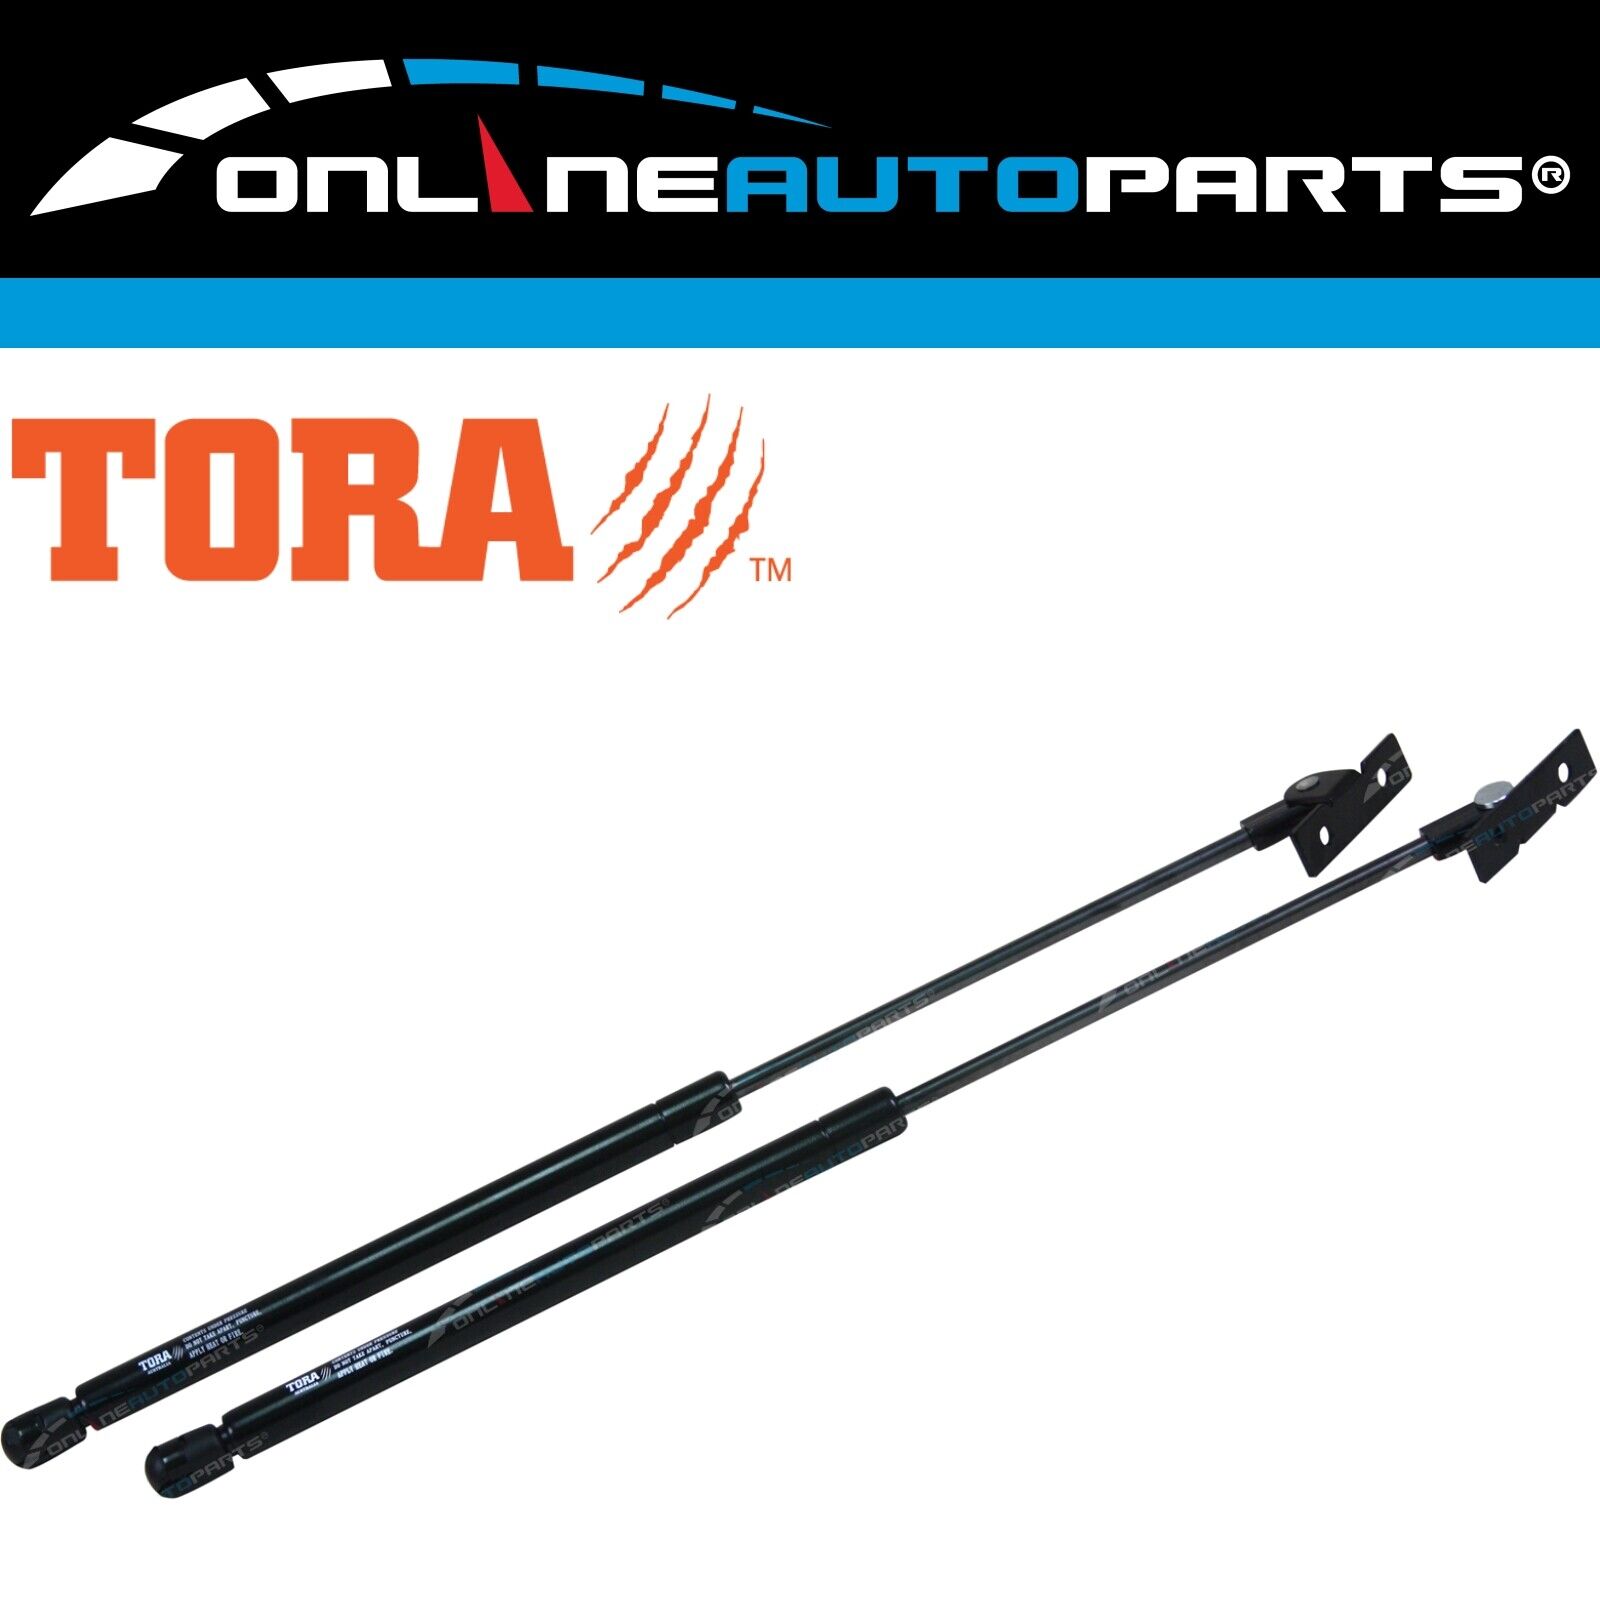 2 Gas Bonnet Struts for Statesman WH WK WL 1999 to 2006 inc Holden Caprice